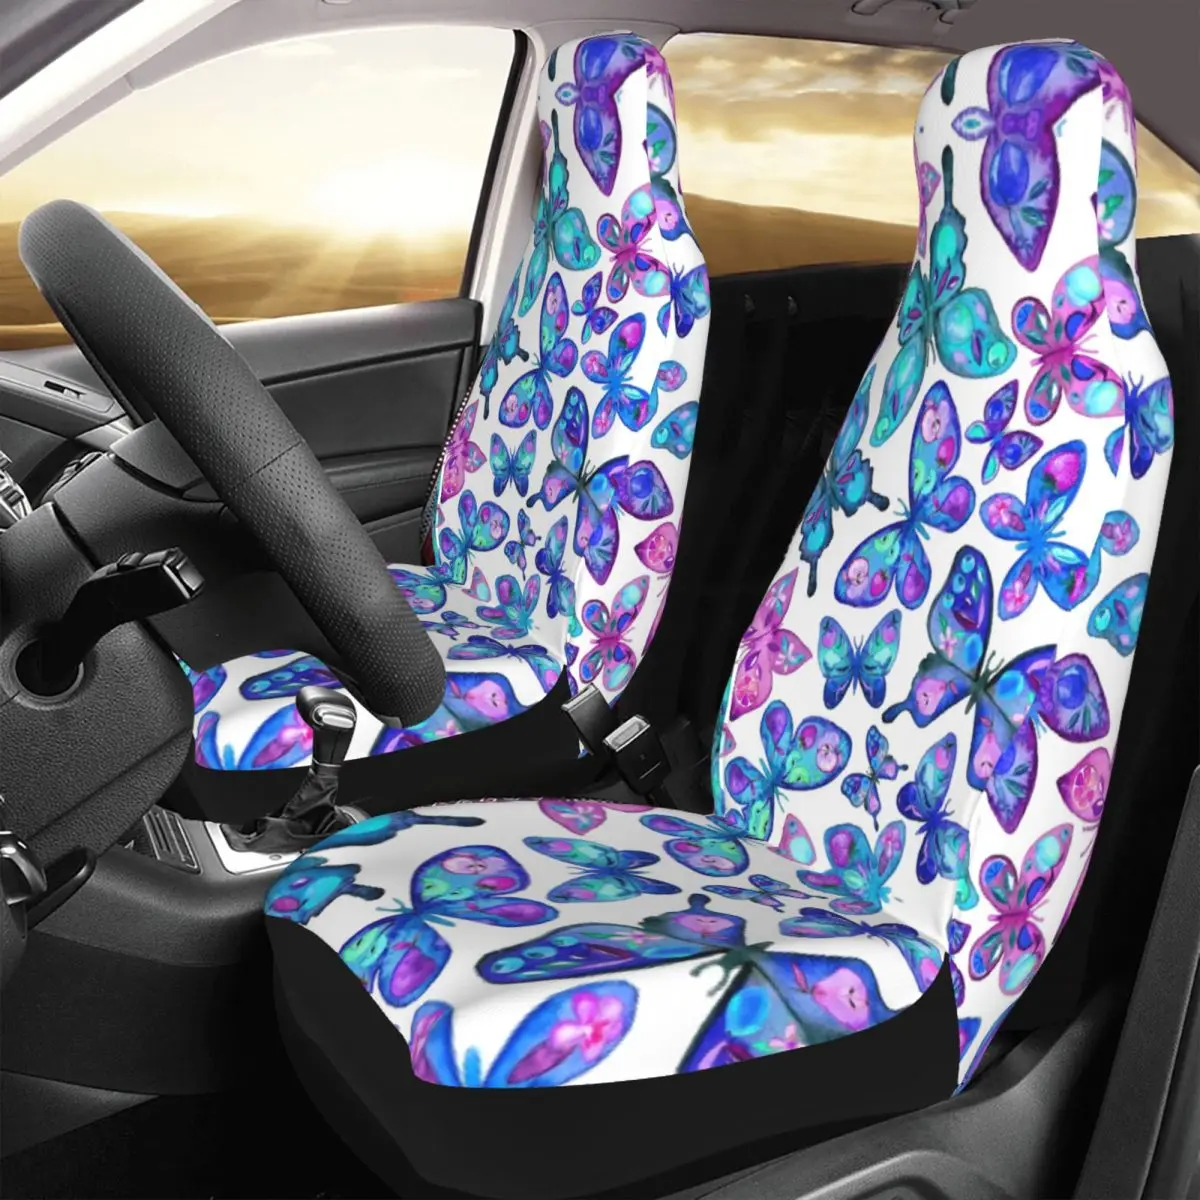 

Watercolor Butterflies Universal Car Seat Cover Four Seasons Travel Colorful Seat Cushion/Cover Polyester Car Styling